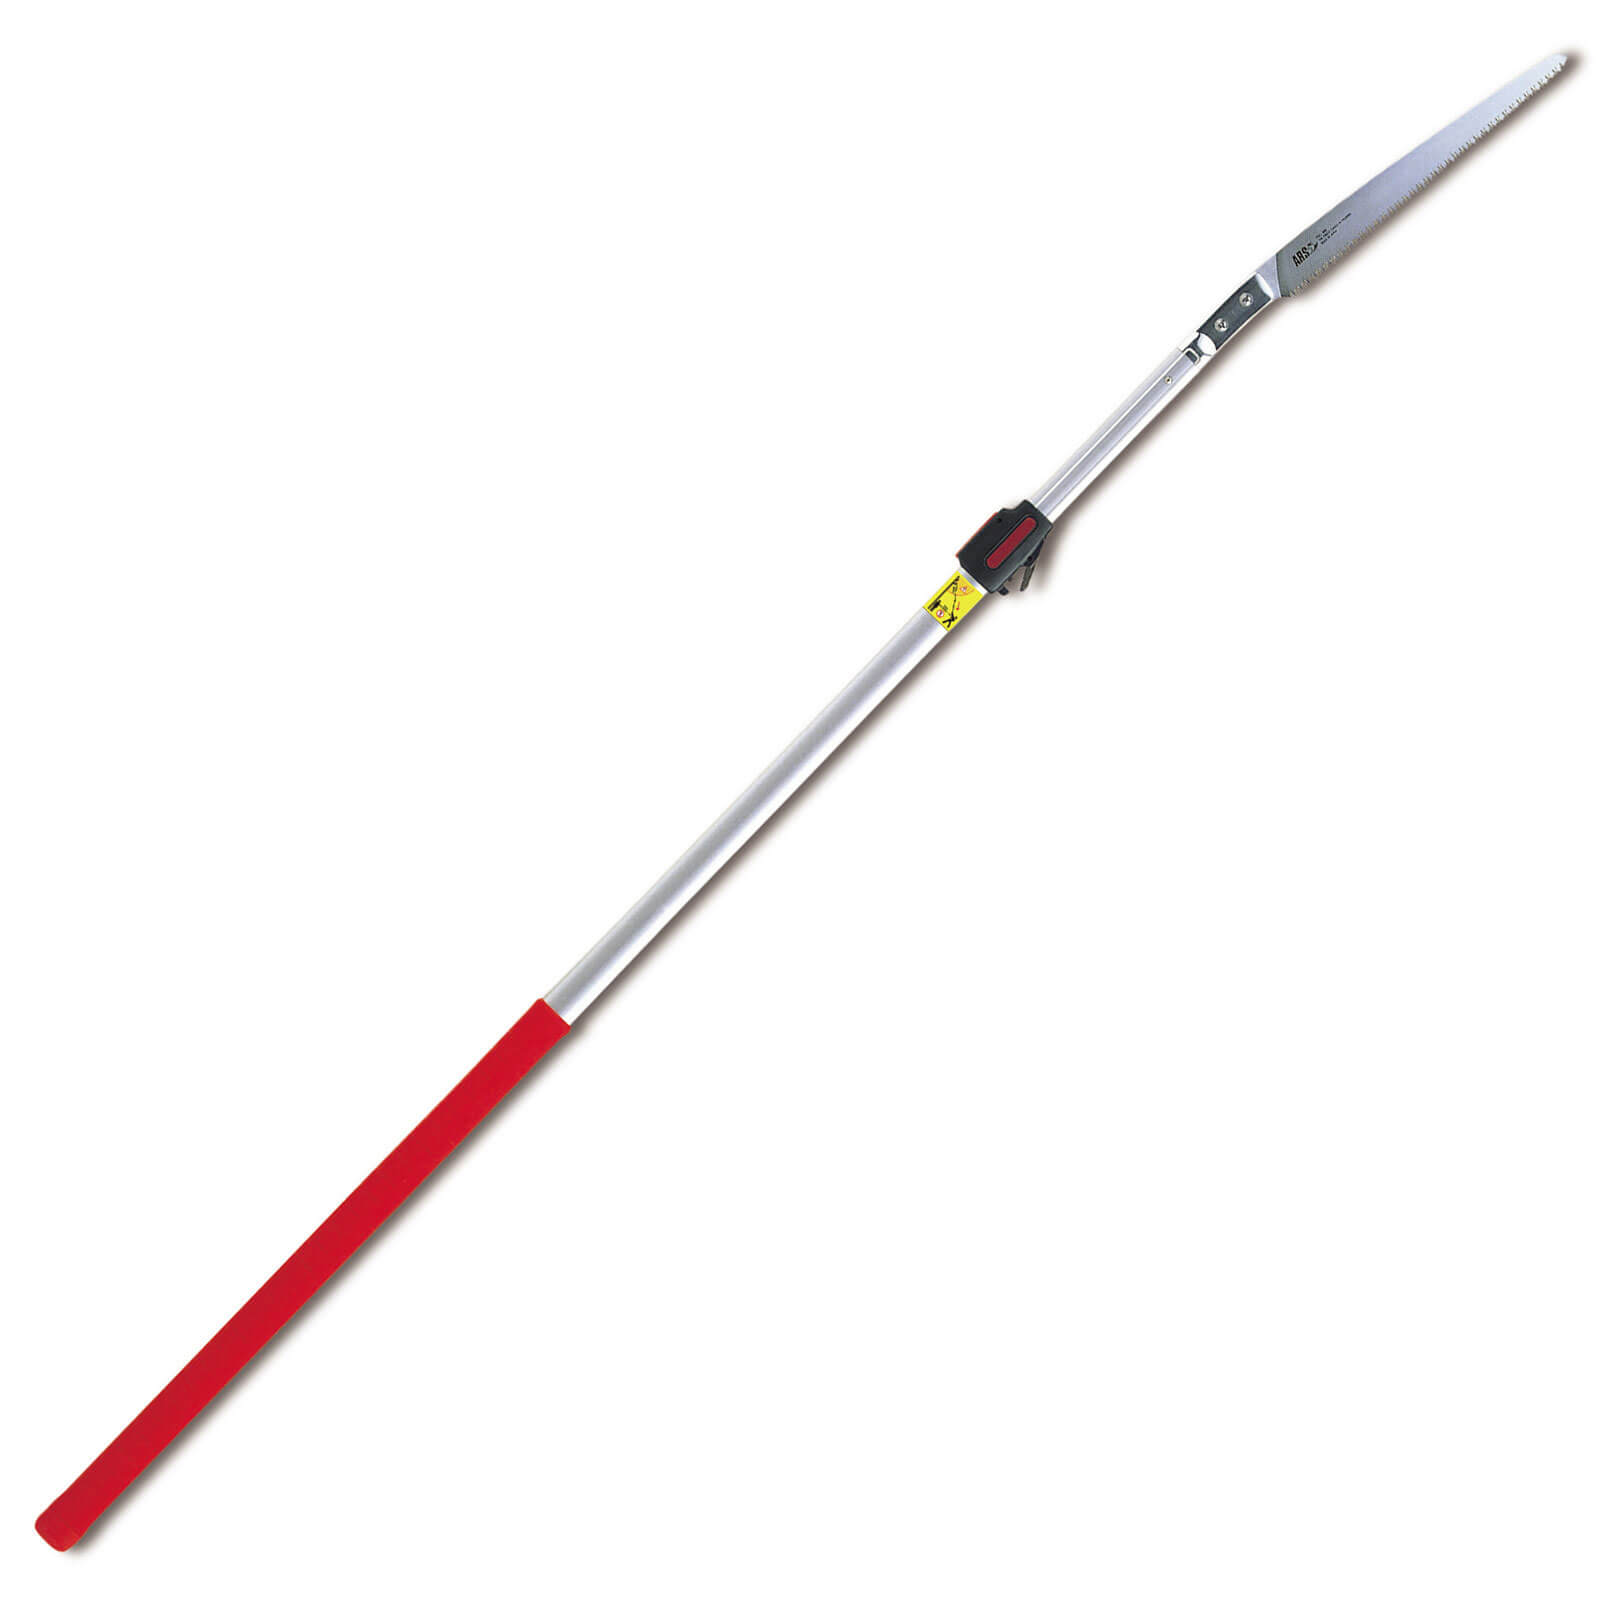 Image of ARS EXW-2.7 Telescopic Pruning Pole Saw 2700mm